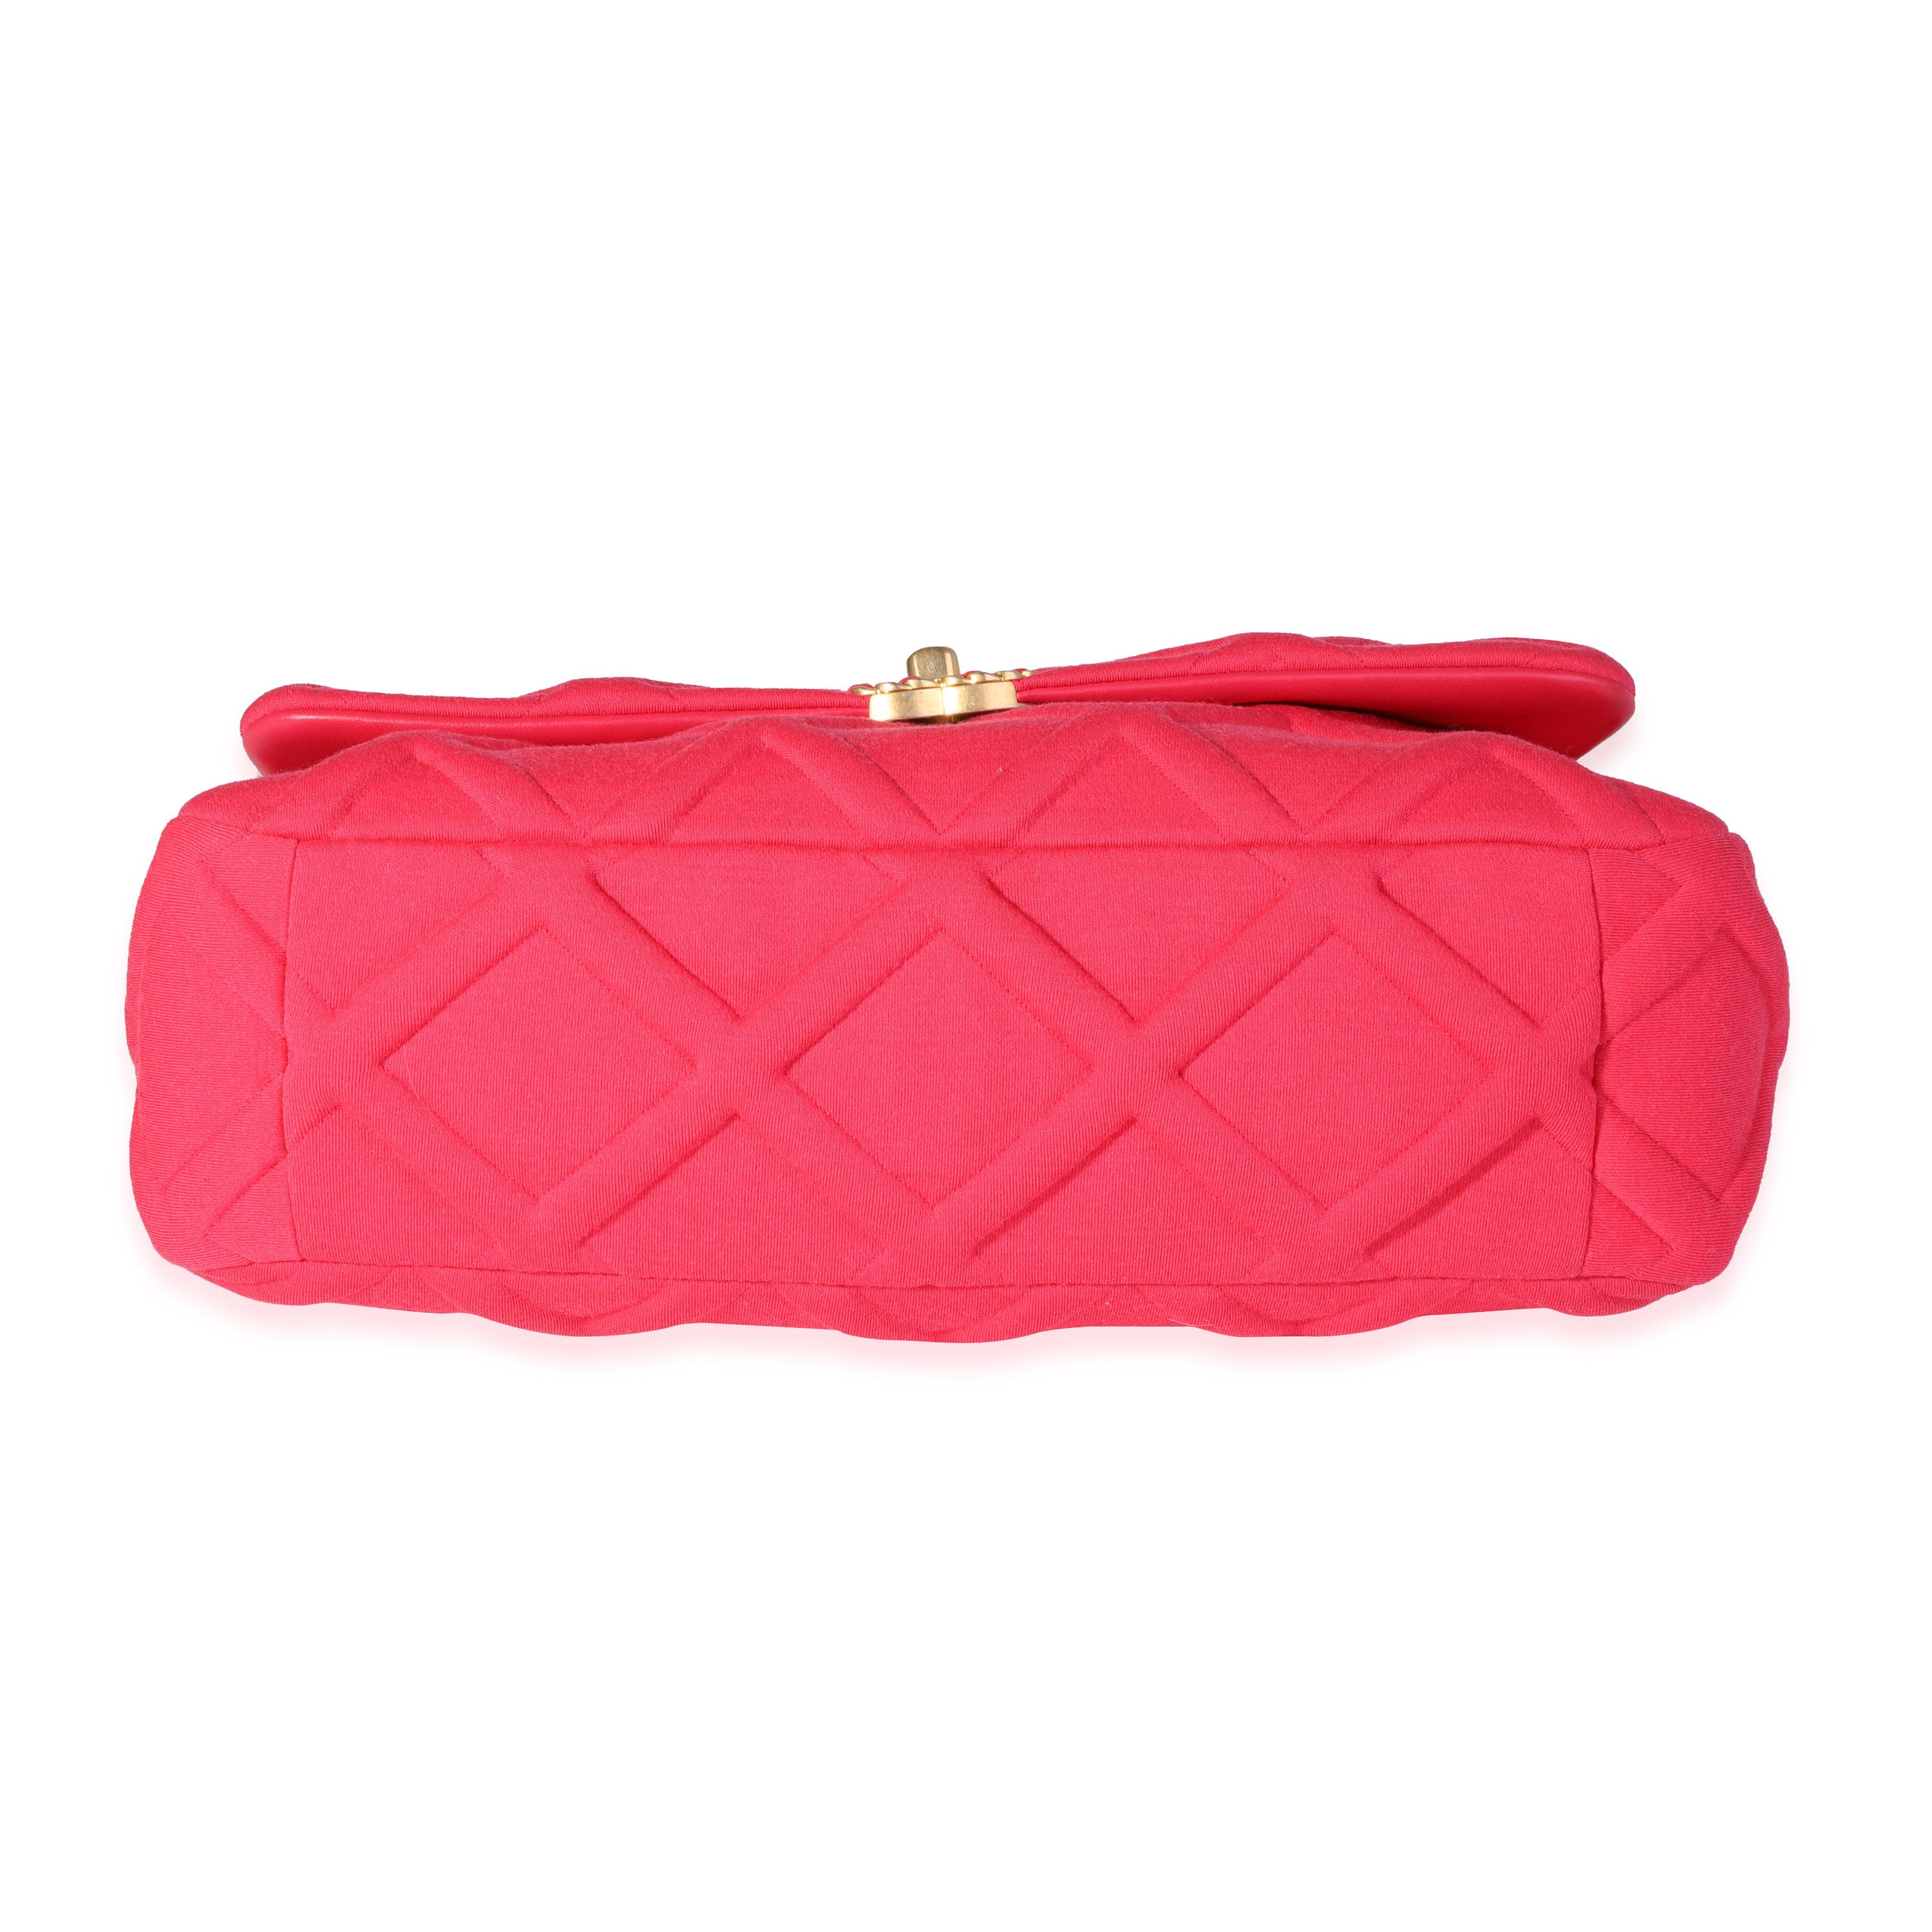 Women's Chanel Hot Pink Quilted Jersey Large Chanel 19 Flap Bag